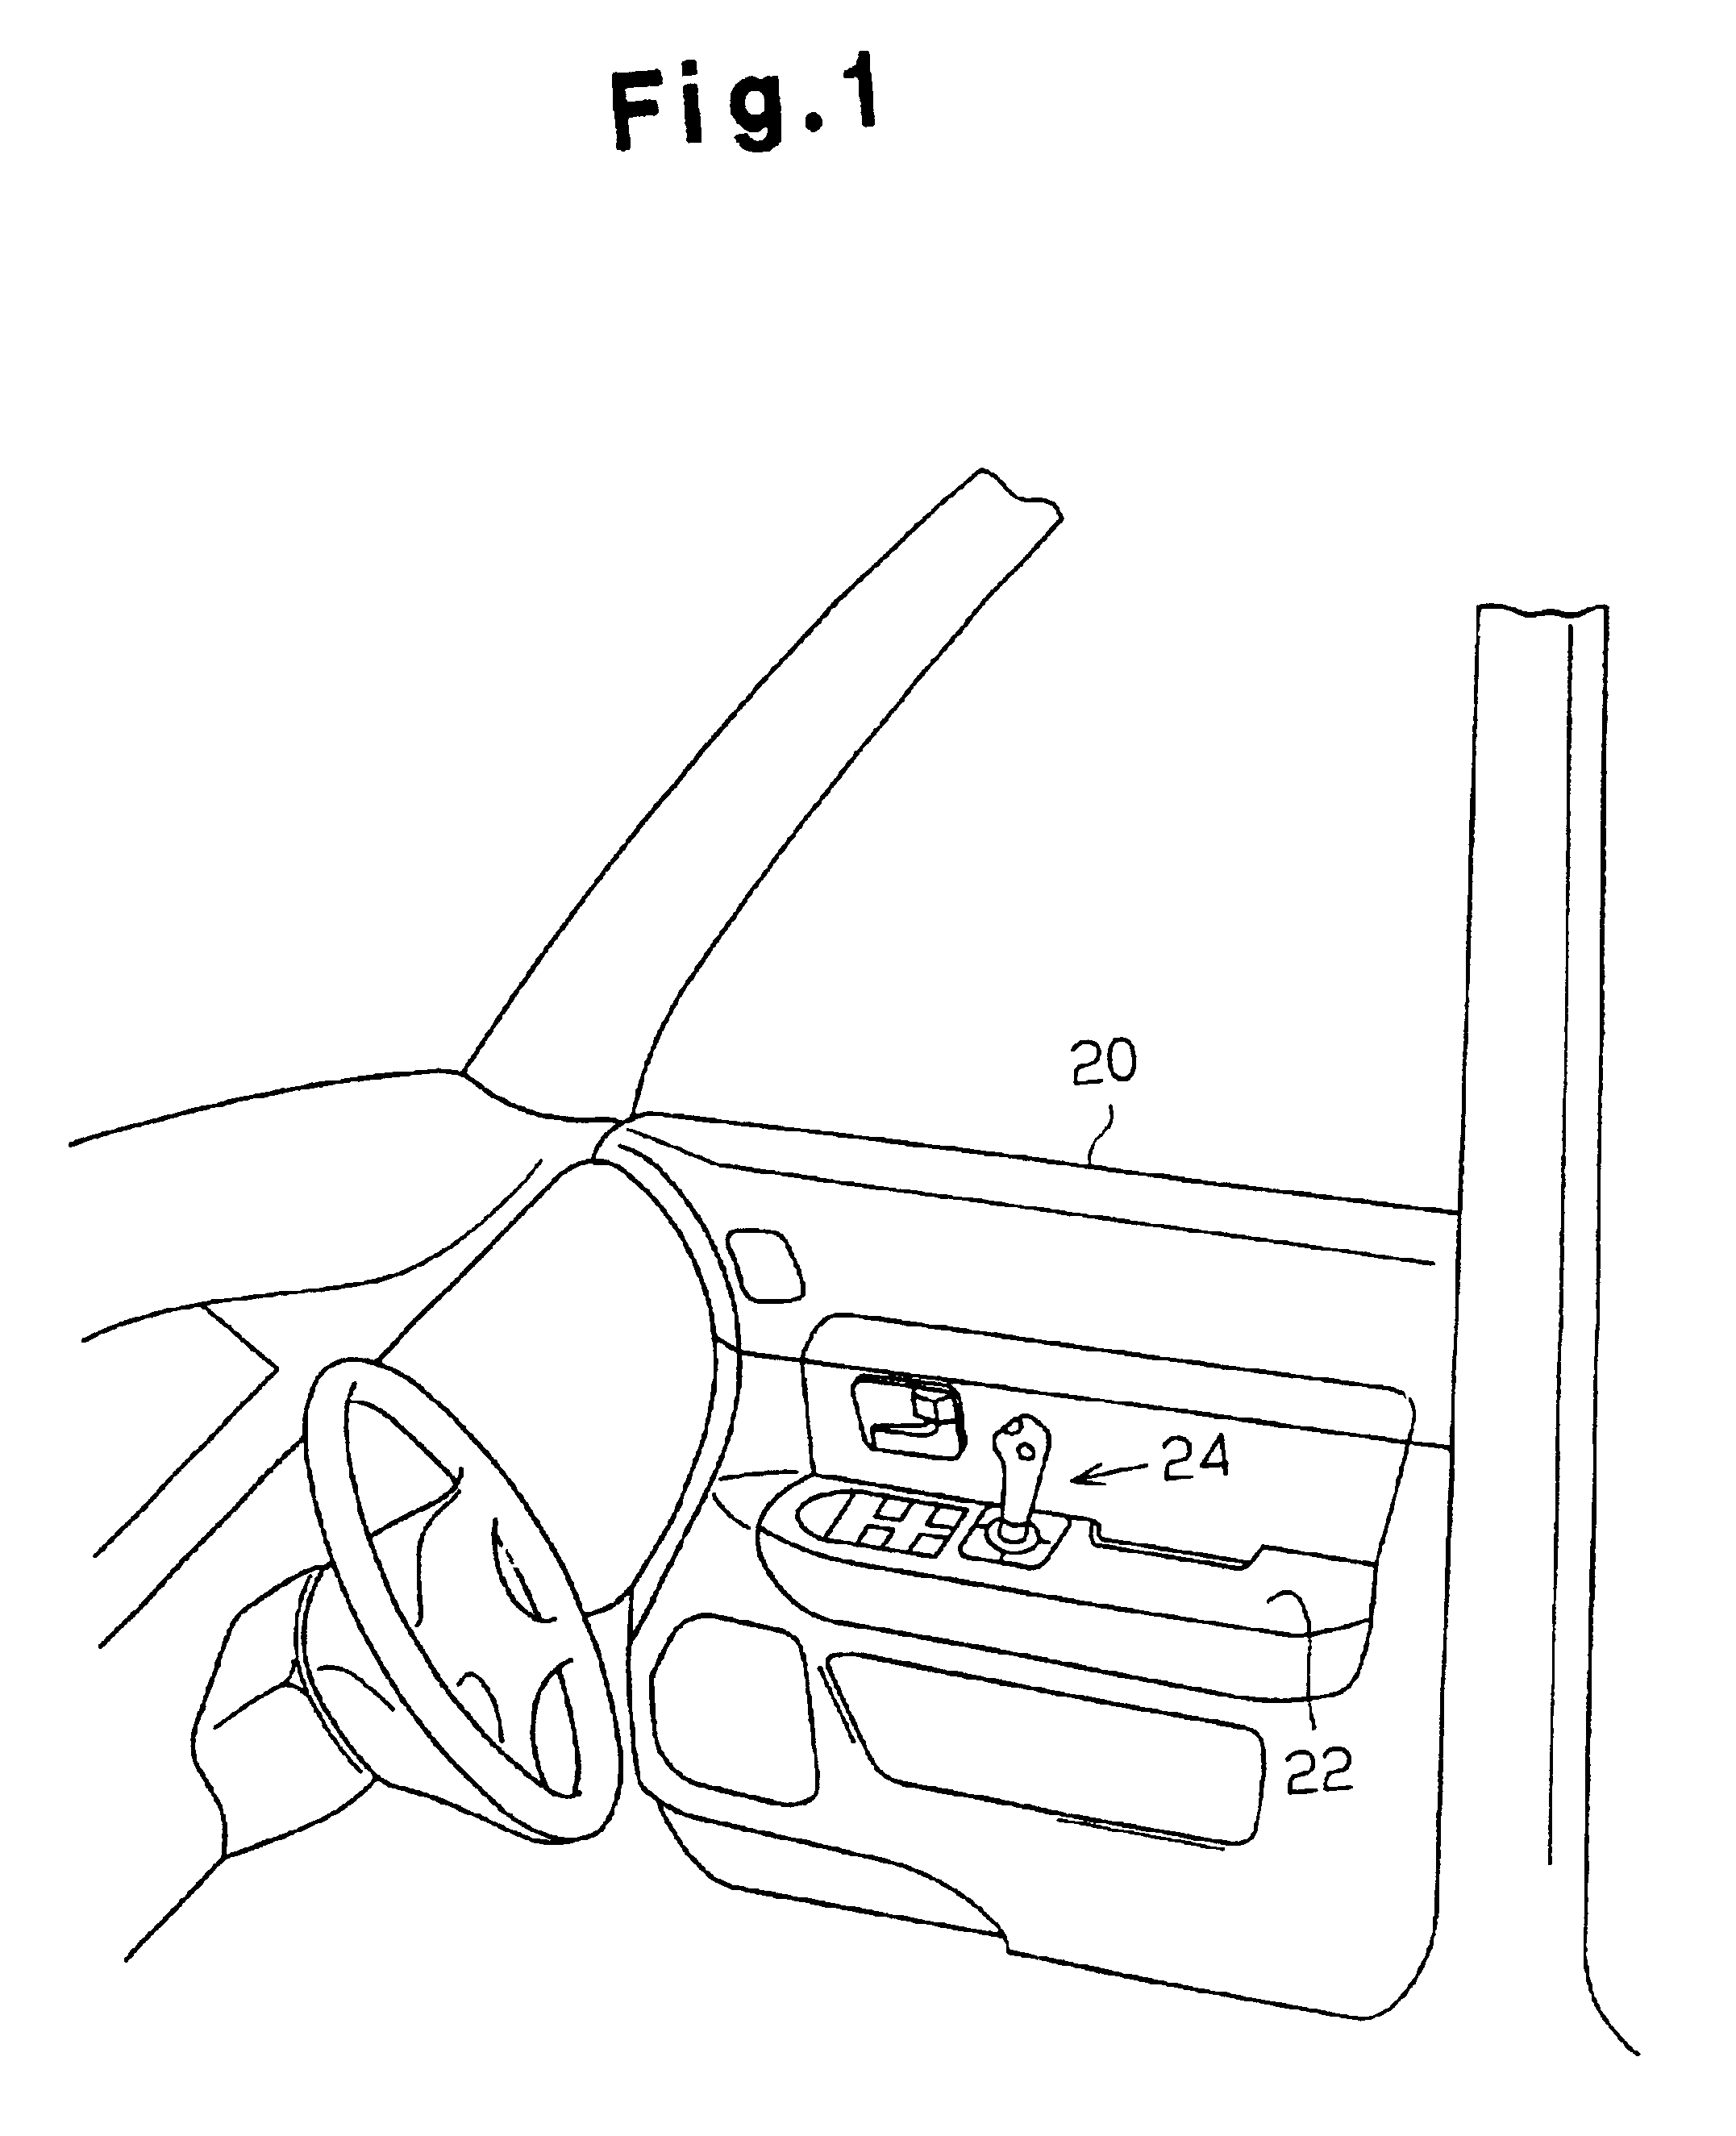 Shift device for vehicle